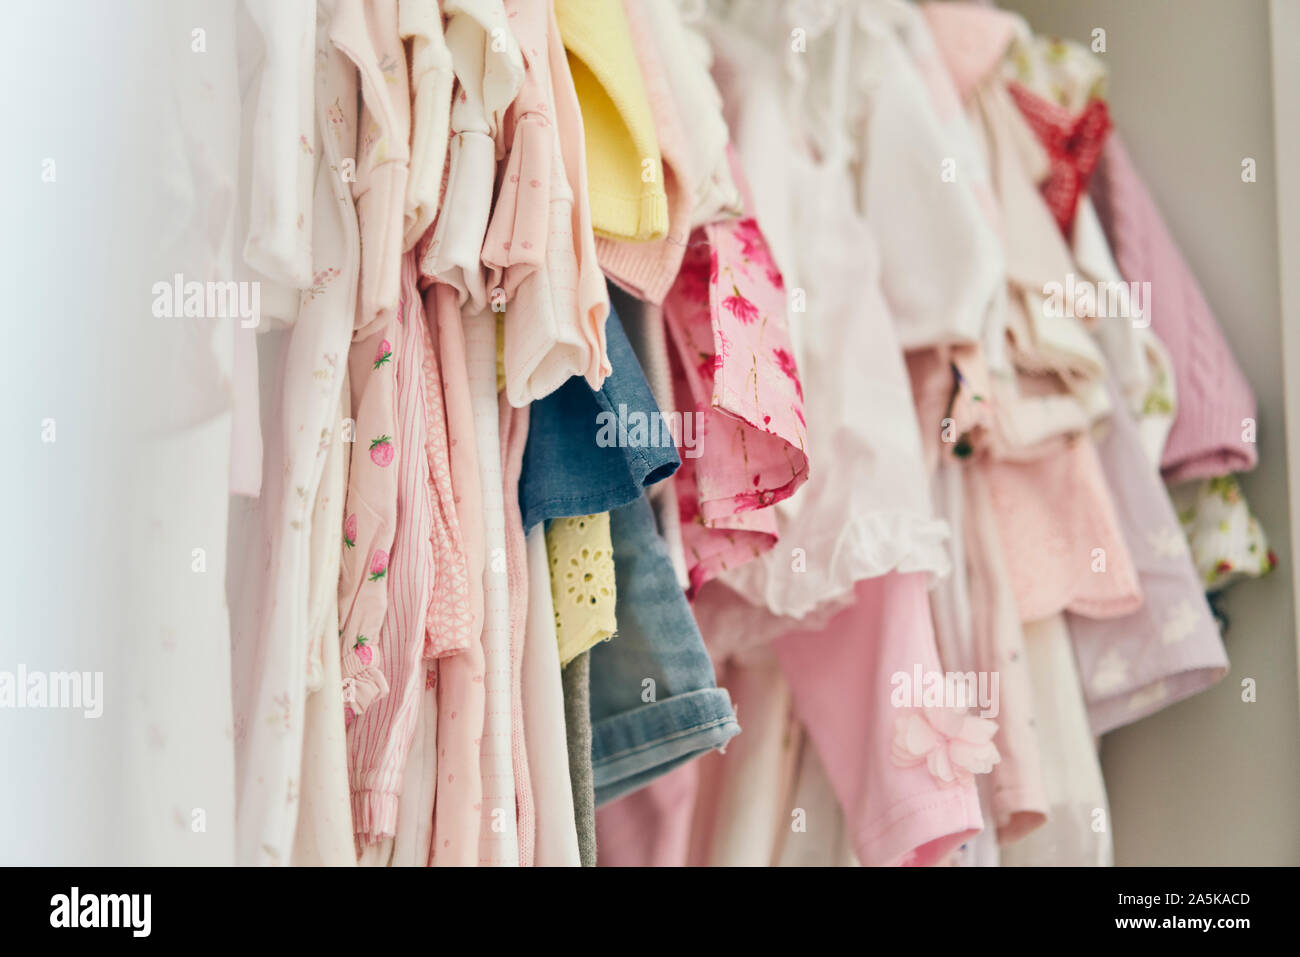 Assortment of baby clothing hung inside cupboard Stock Photo